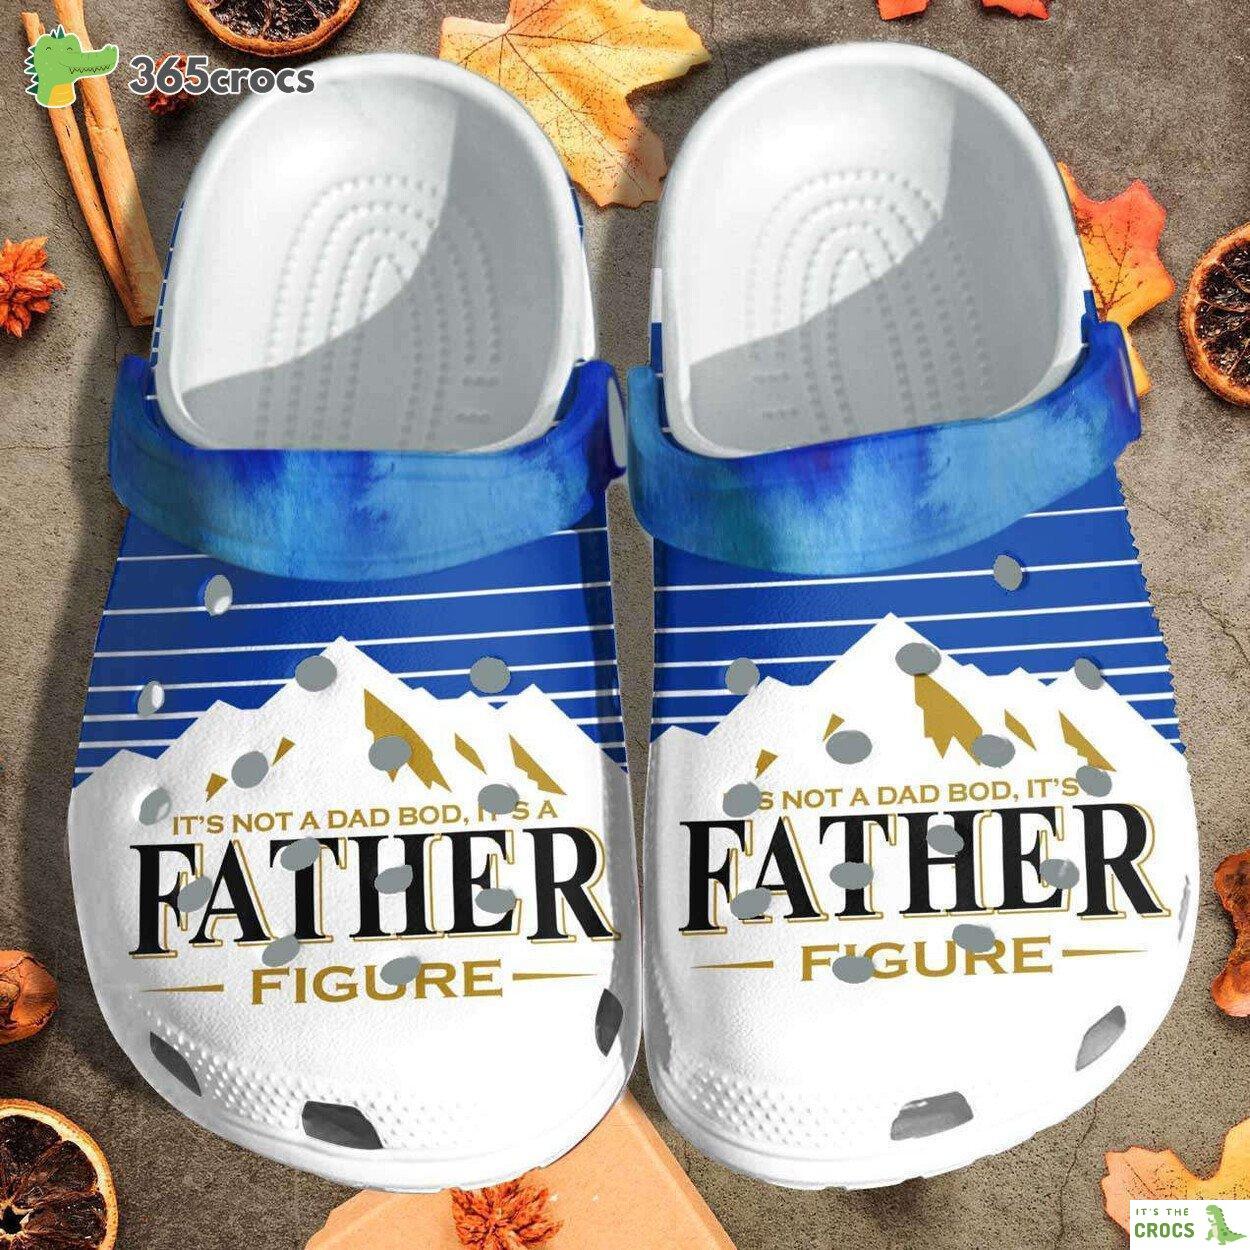 Celebrate Fun Its Not A Dad Bod Theme Inspired by Busch Beer on Clogs